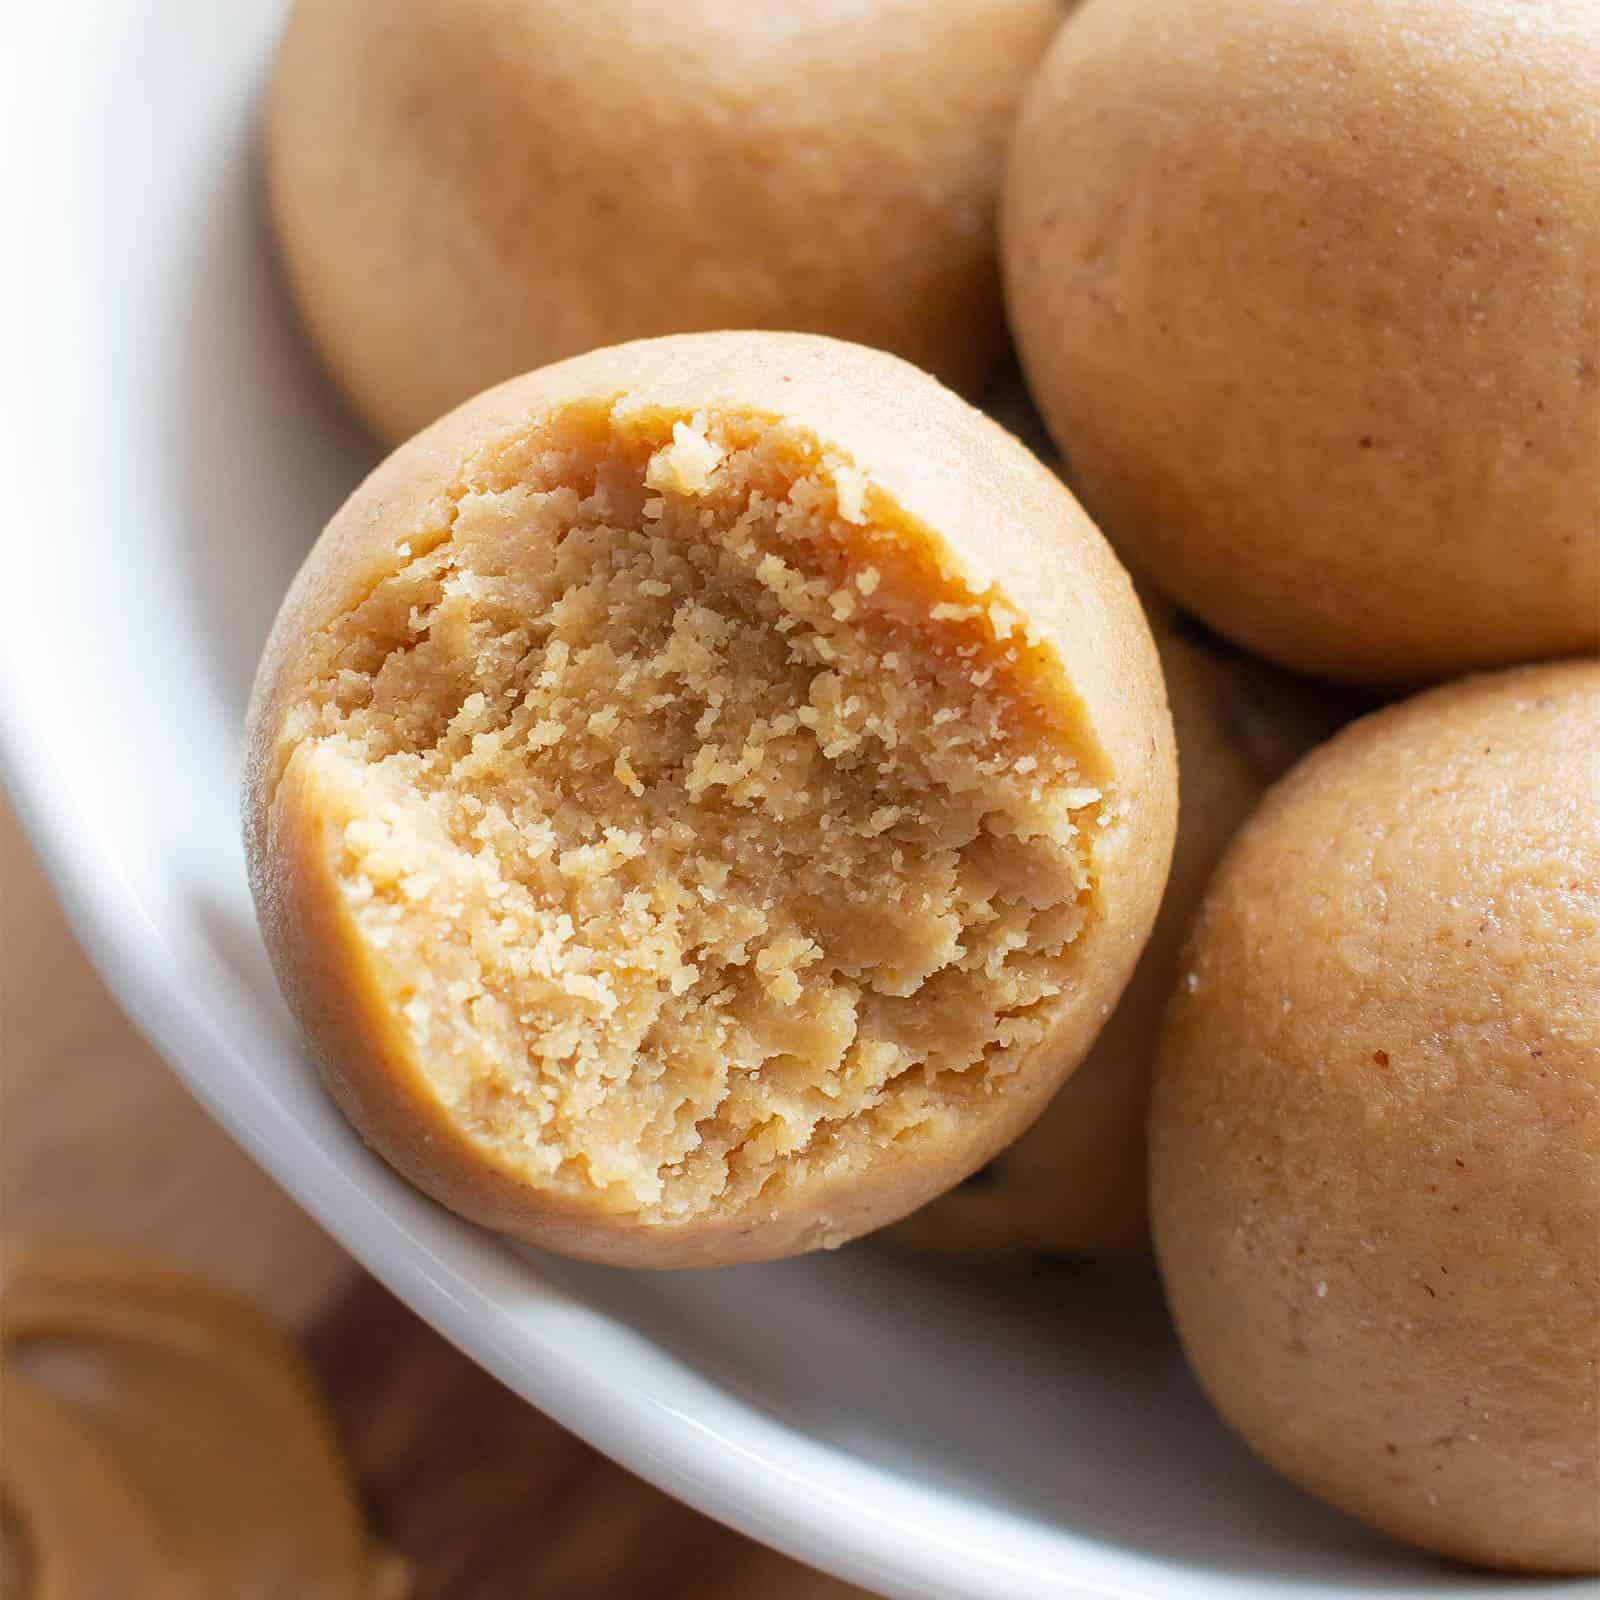 Peanut Butter Keto Energy Balls Recipe: just 3 ingredients for easy keto energy bites bursting with peanut butter flavor! Quick breakfast, protein-packed, Vegan, Gluten Free & Healthy. #Keto #PeanutButter #Healthy #LowCarb | Recipe at BeamingBaker.com